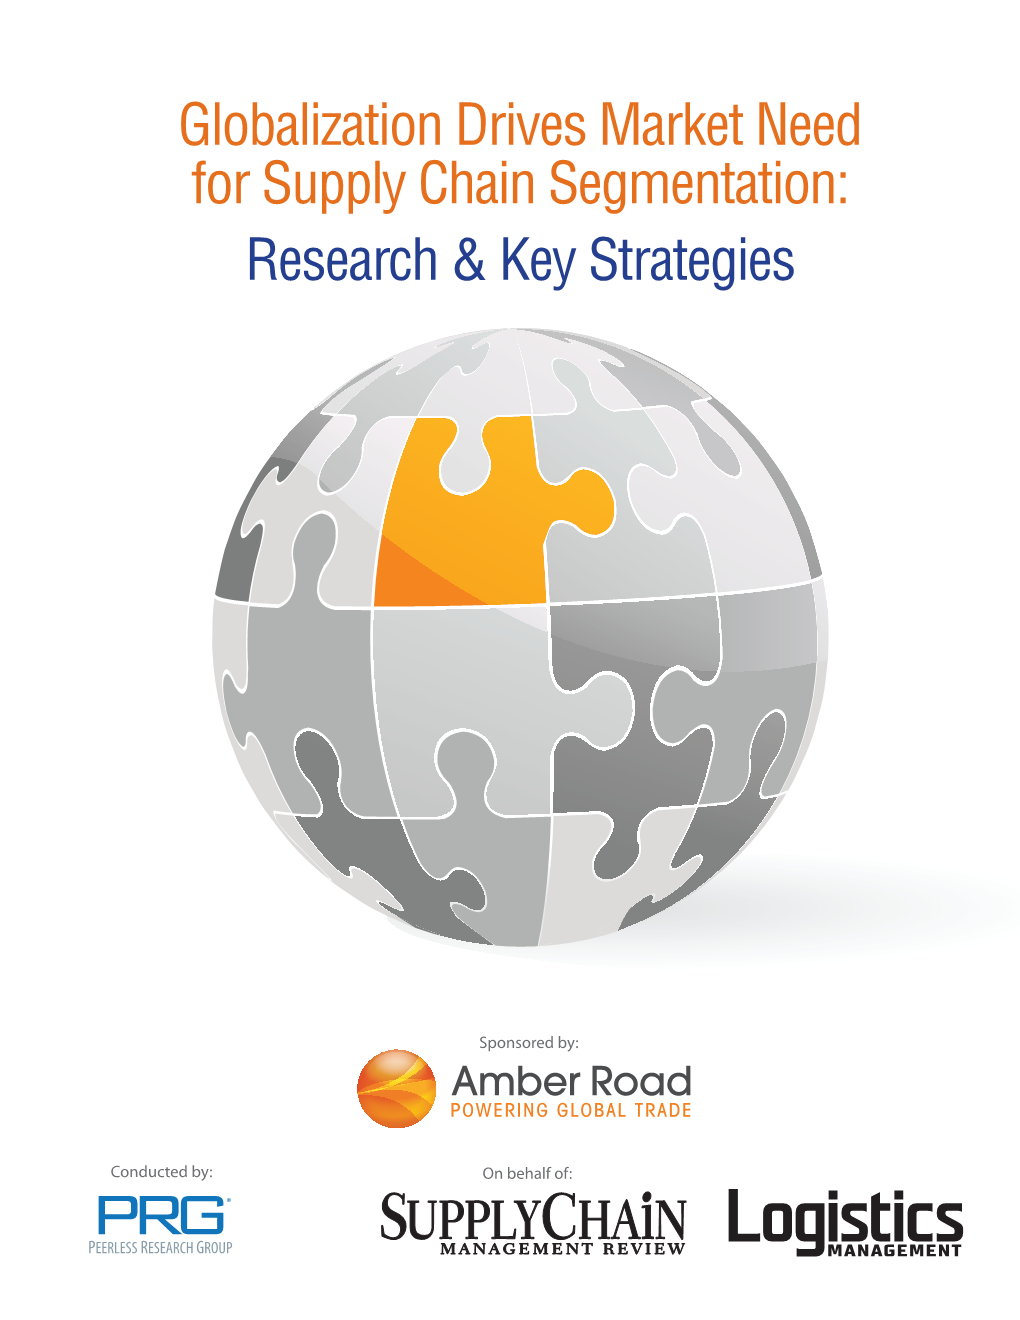 Globalization Drives Market Need for Supply Chain Segmentation: Research & Key Strategies